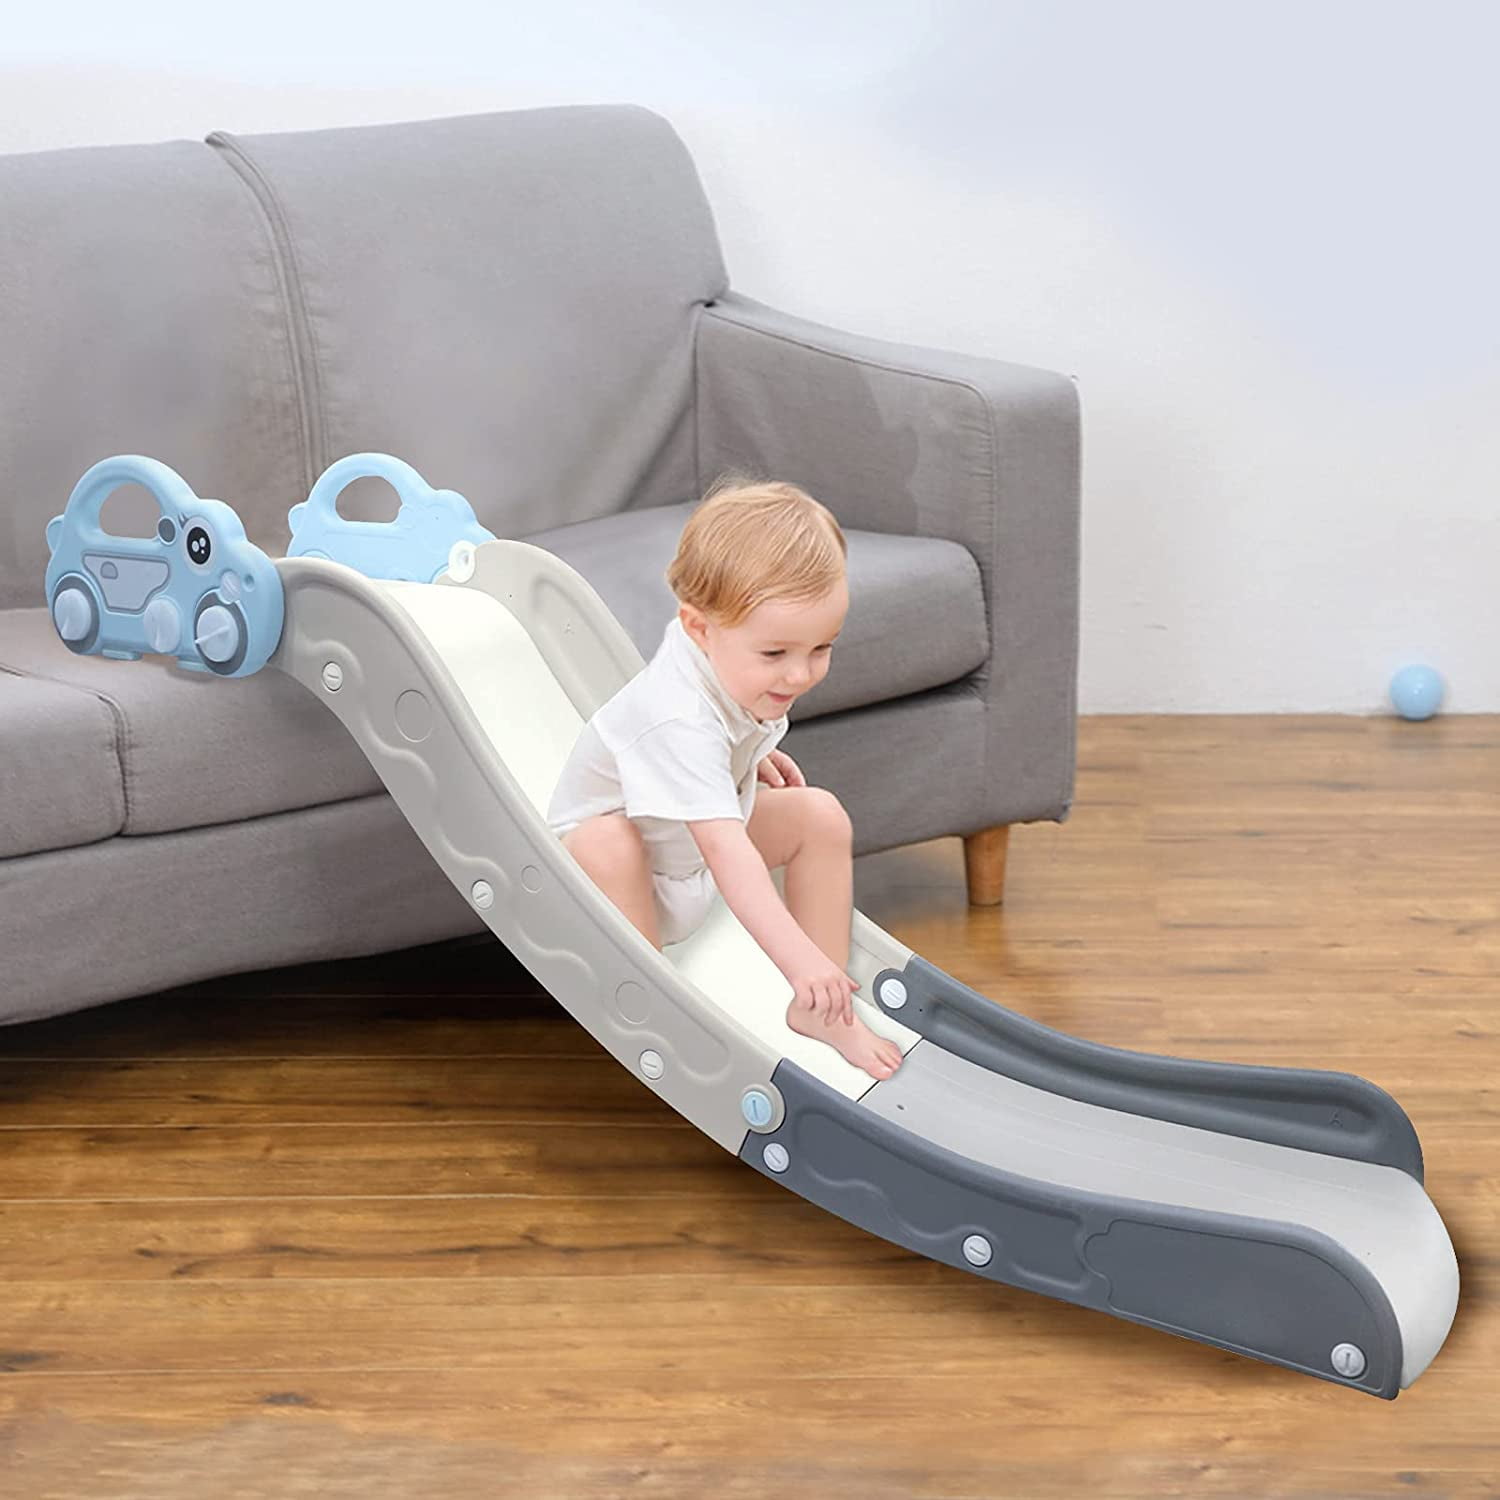 FiavUs Kids Sofa Slide, Climbing Slide for Bed and Couch, Plastic Indoor  Slide Toy, Kids Slide for Toddlers Age 1-3